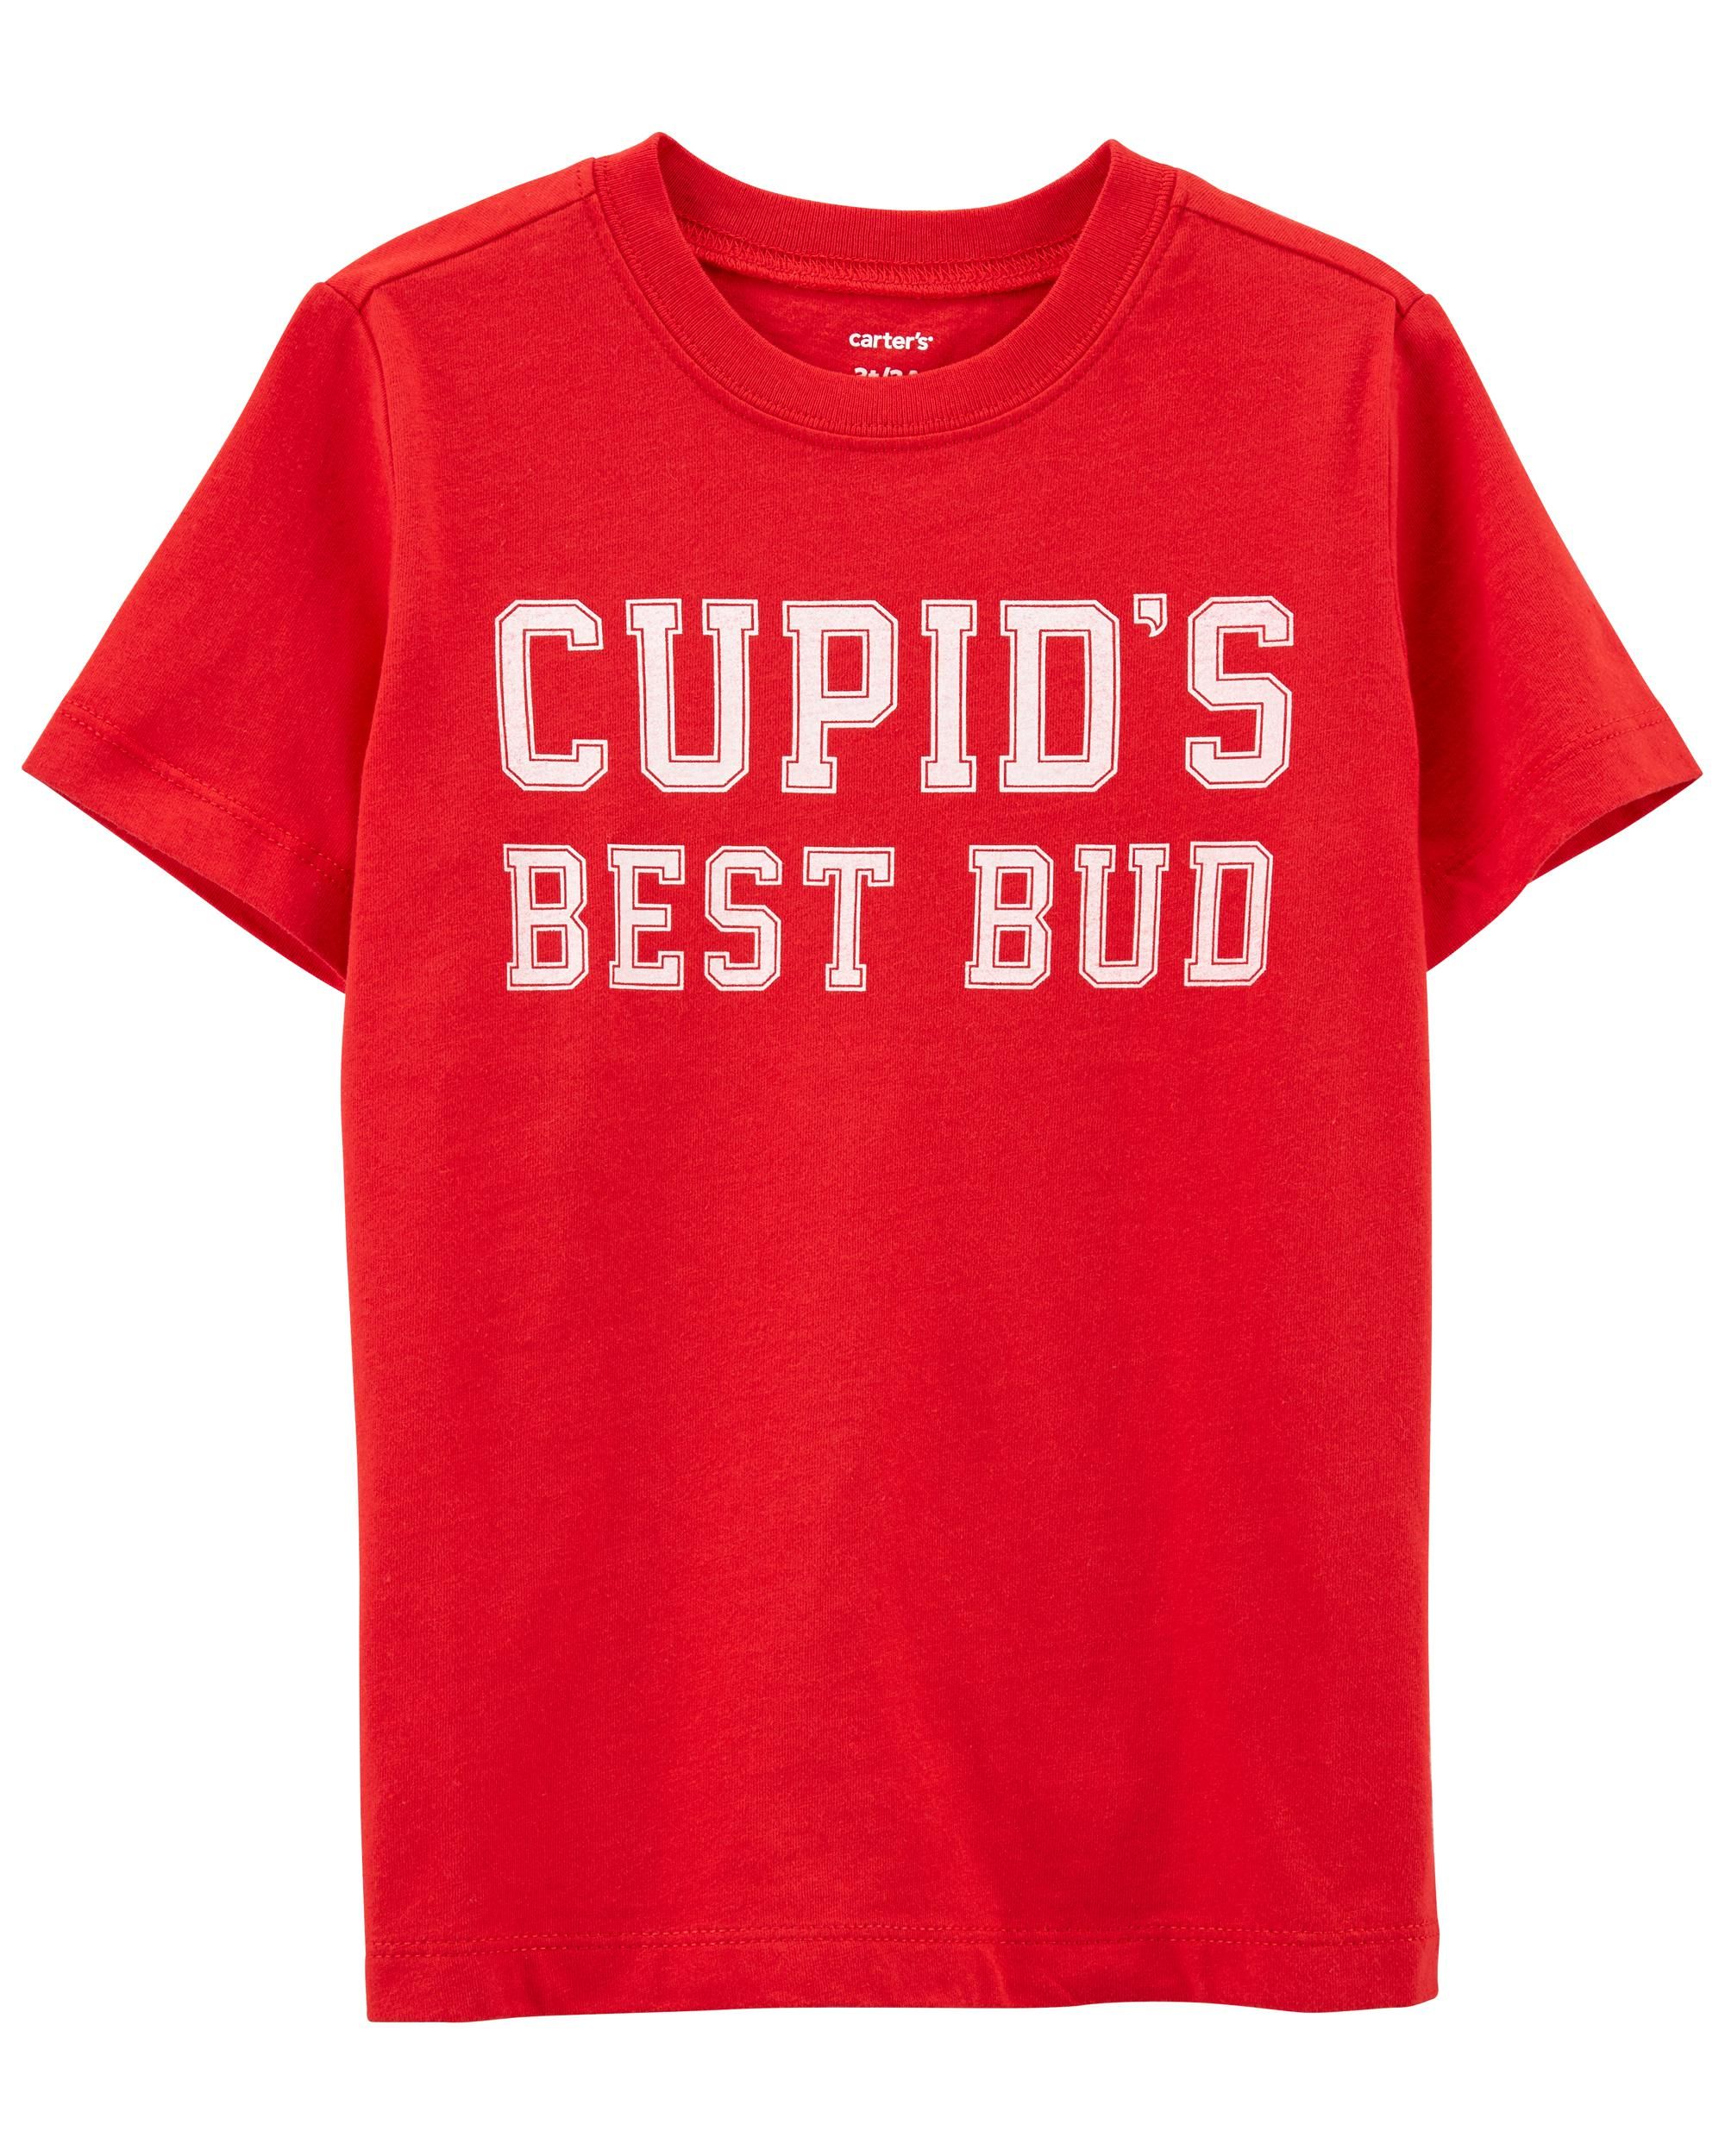 Toddler Valentine's Day Cupid's Best Bud Jersey Tee | Carter's